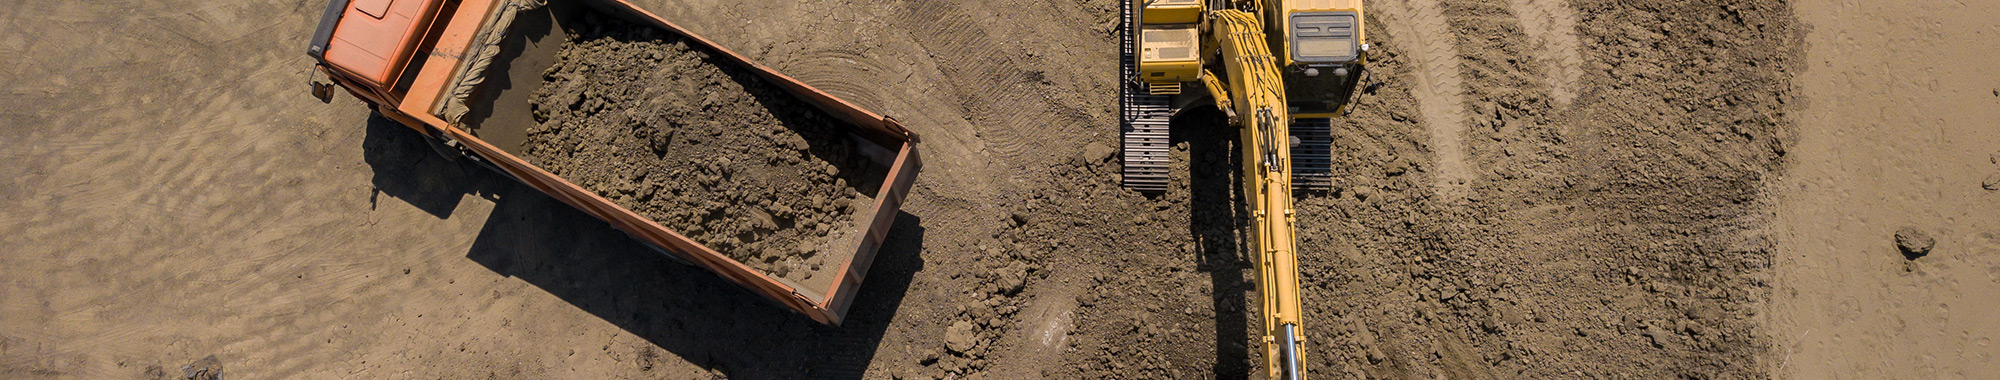 Aerial photo looking overhead at an excavator filling a dump truck